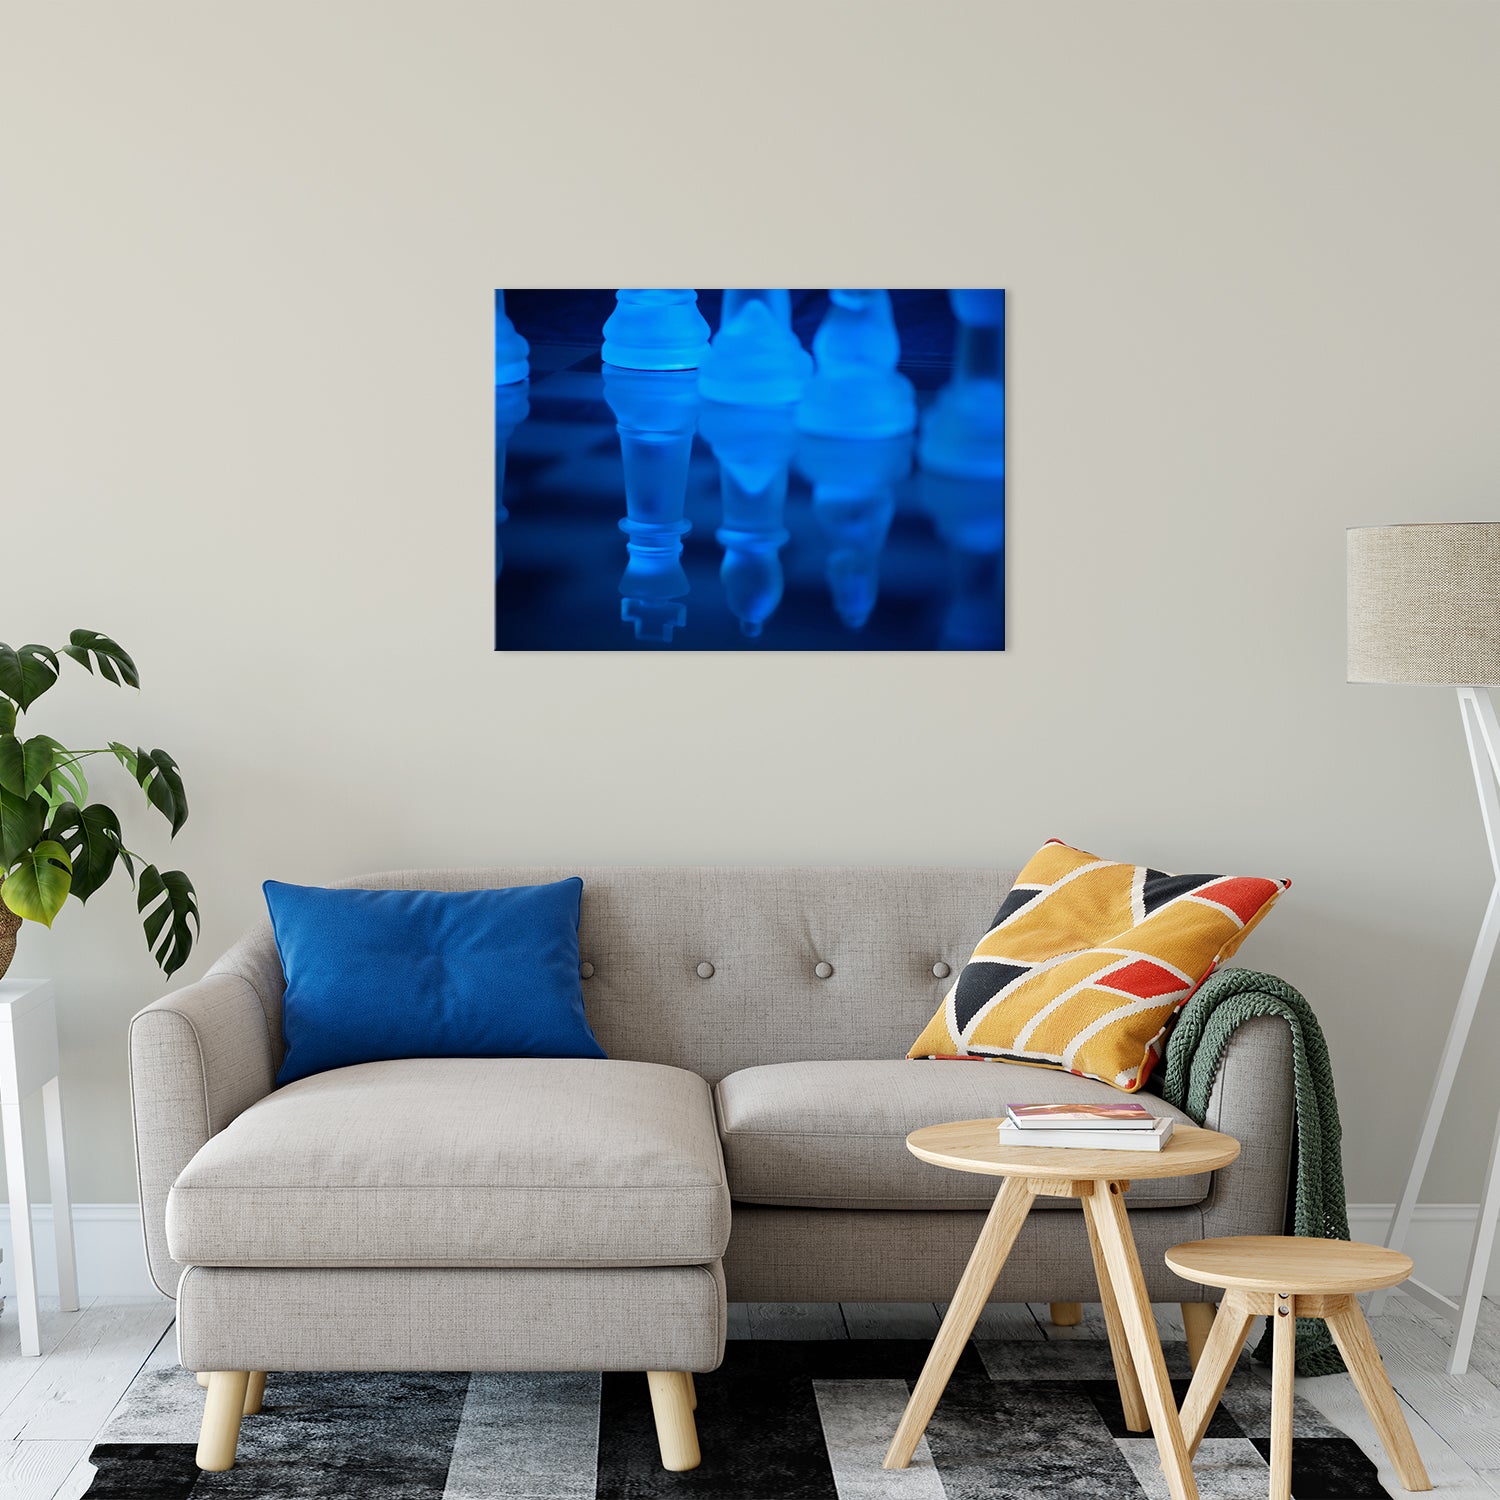 Reflections, Chess Pieces Abstract Photo Fine Art Canvas & Unframed Wall Art Prints 24" x 36" / Fine Art Canvas - PIPAFINEART